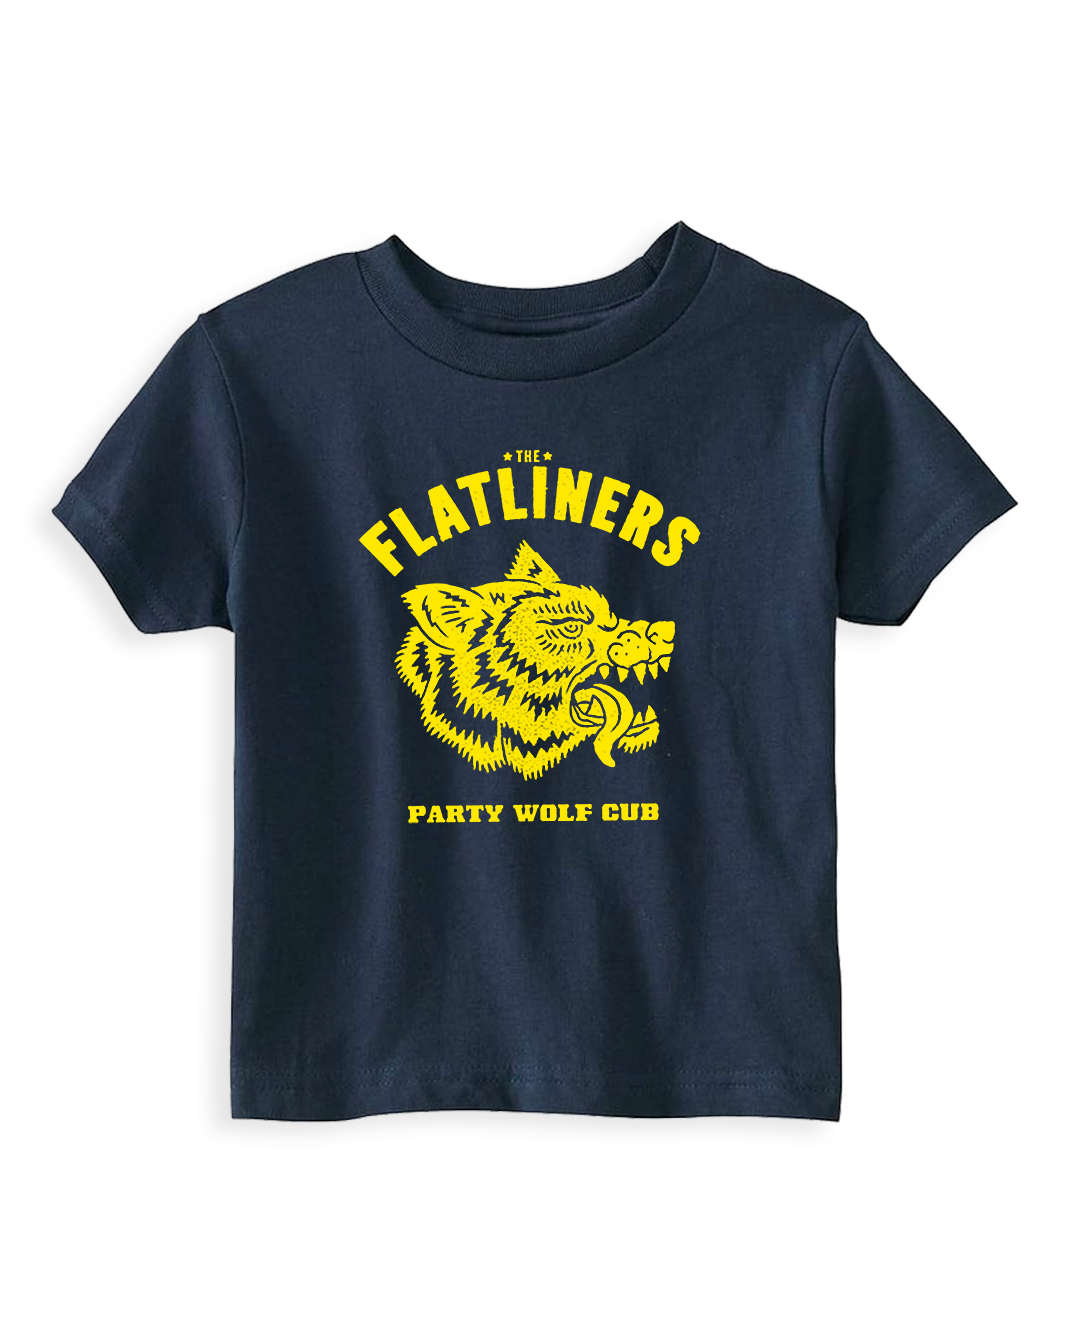 The Flatliners Party Wolf Cub Toddler Tee